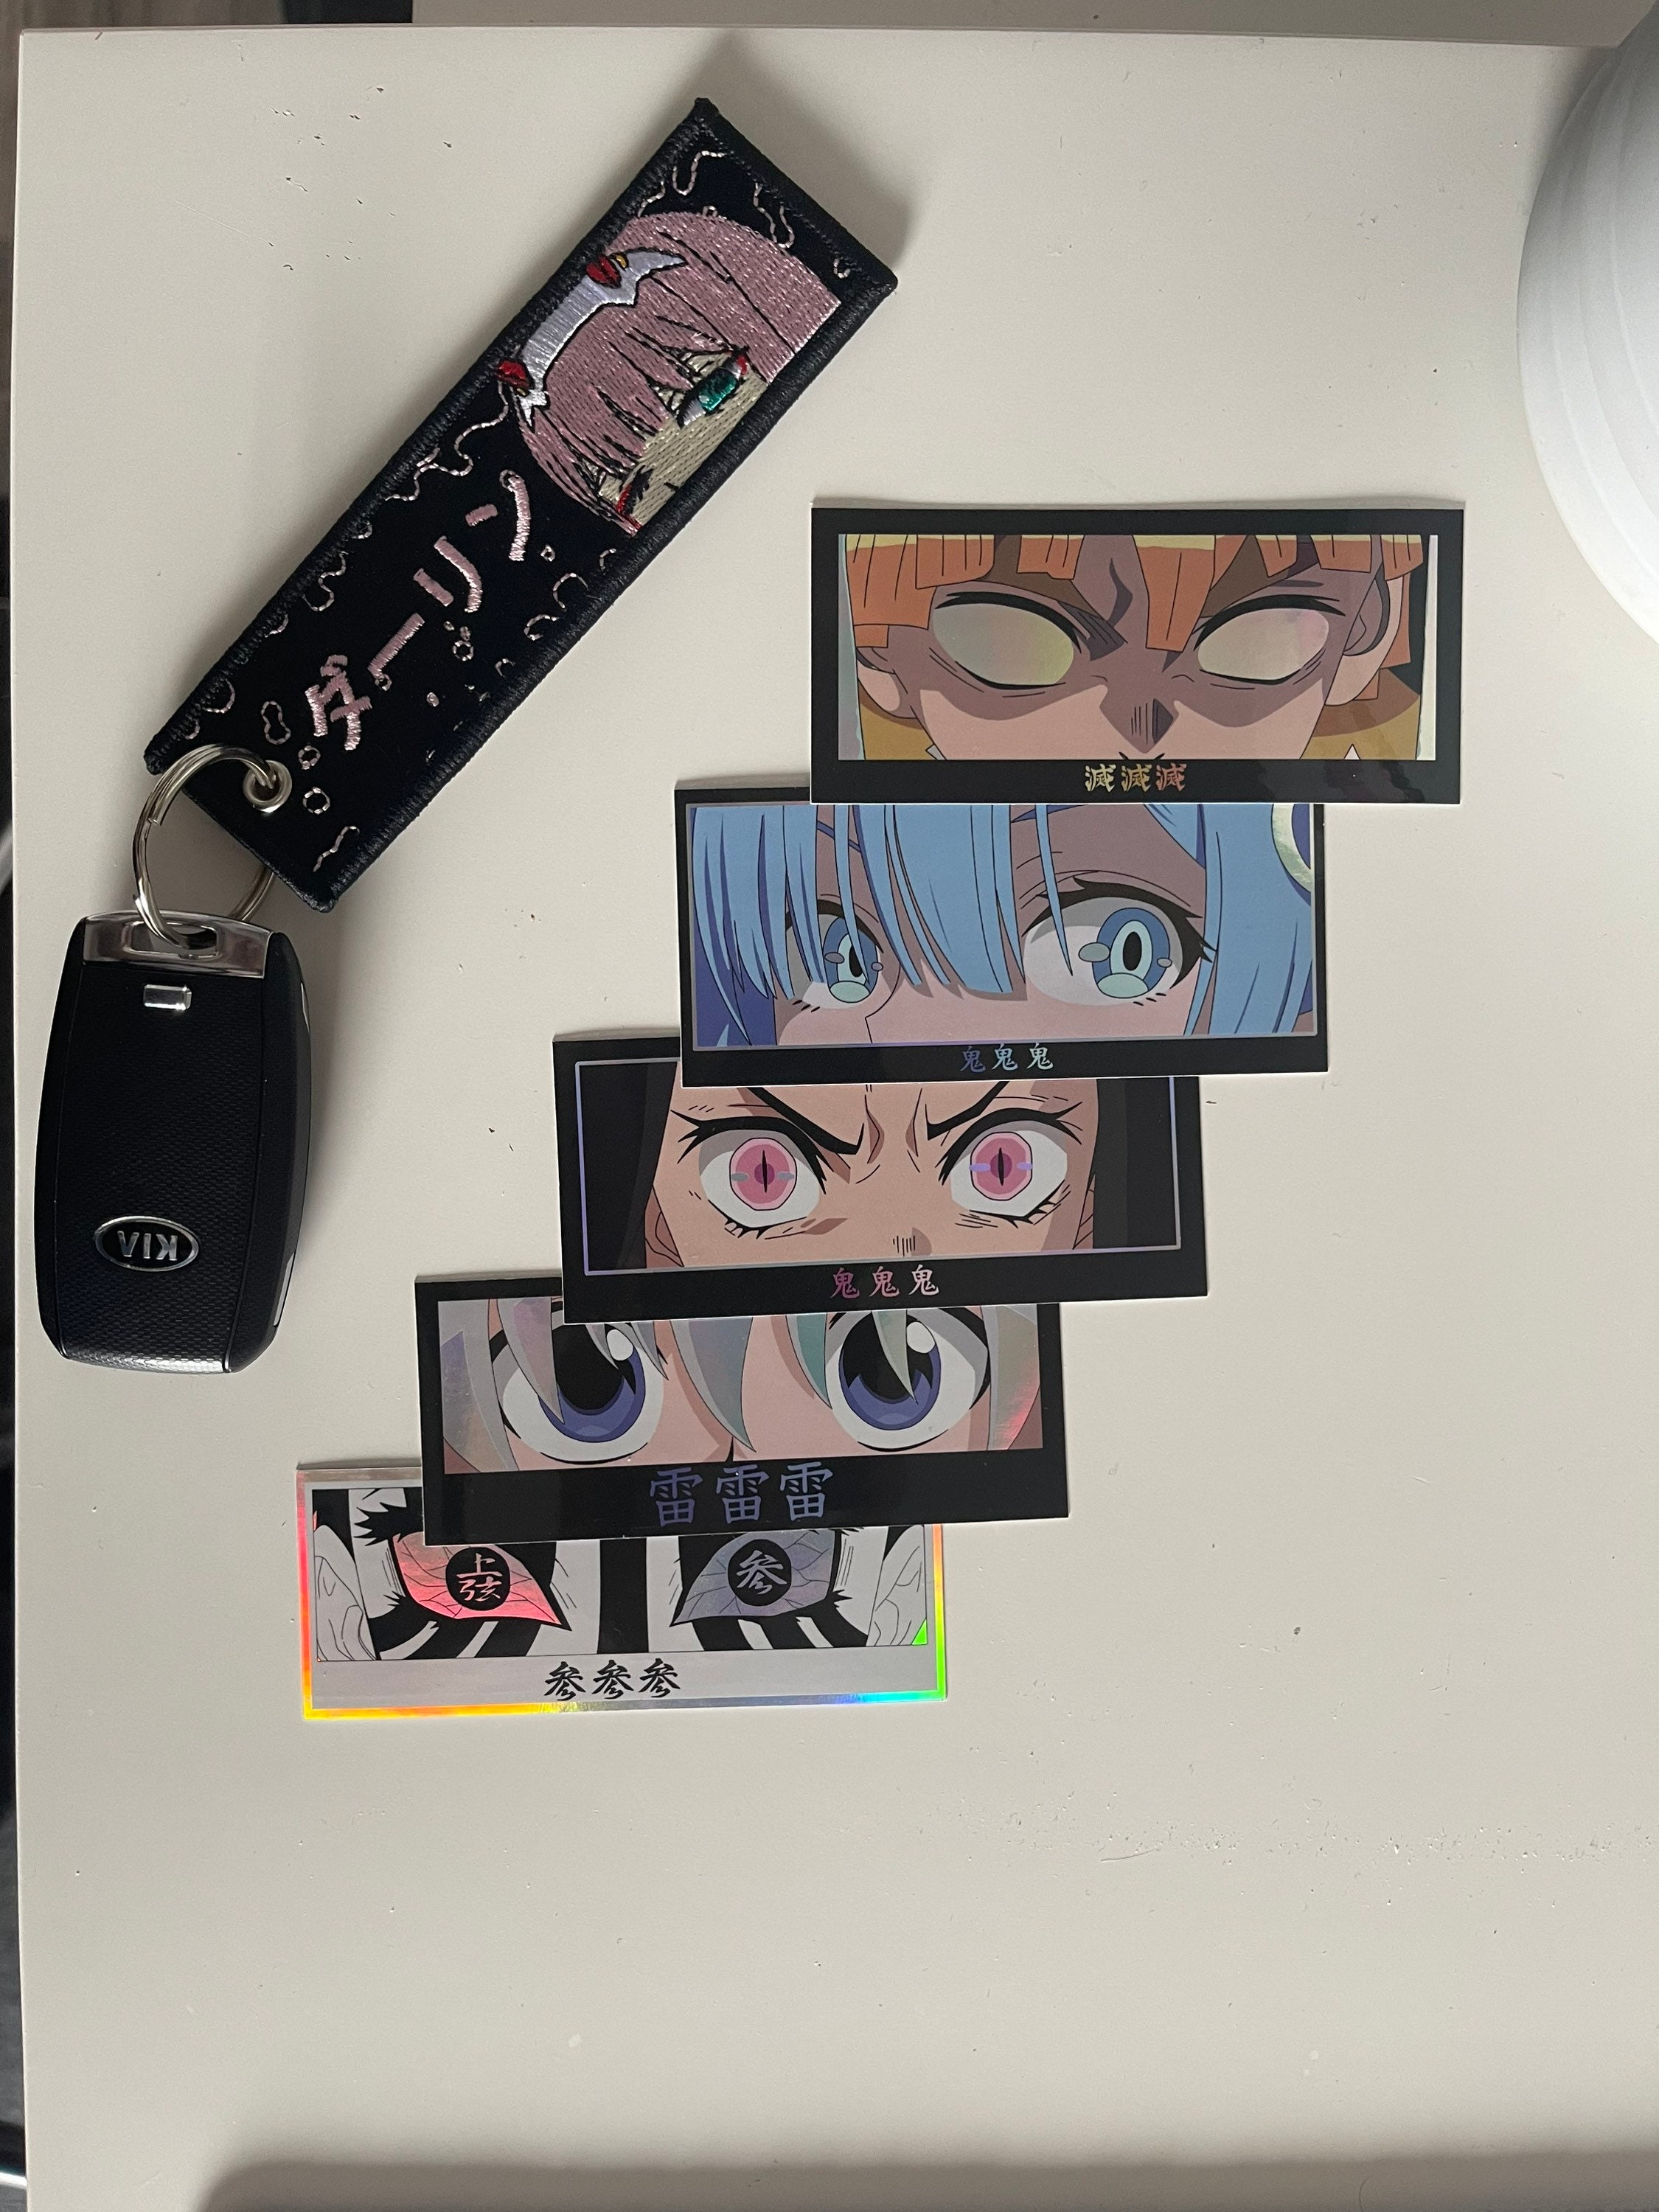 Buy Anime Eyes Stickers Online In India  Etsy India